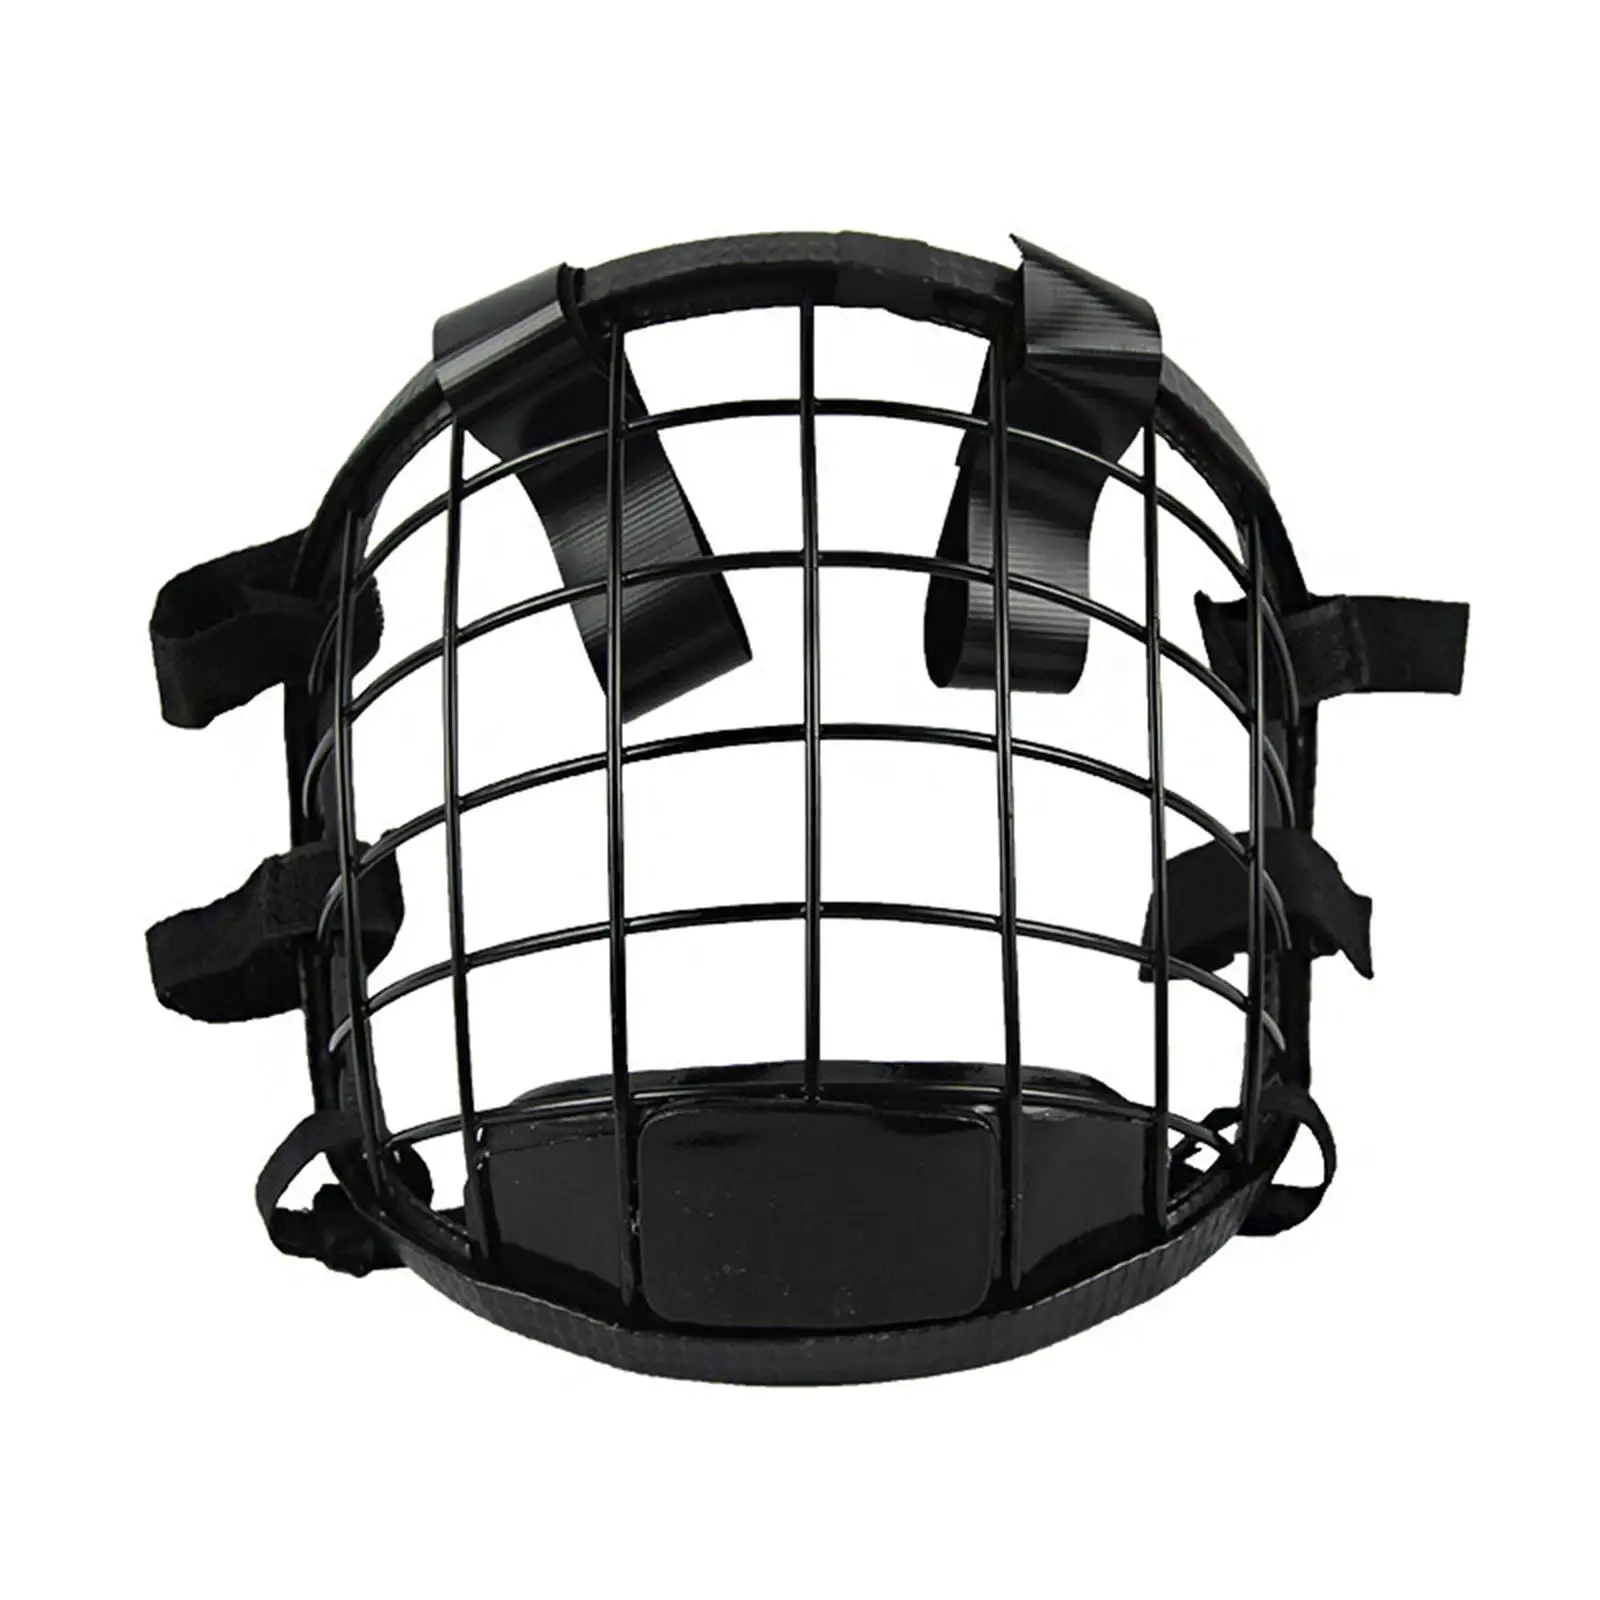 Metal Taekwondo Guard Child Removable Face Protective Face Guard Training Gear for Sparring Sanda Grappling Kickboxing